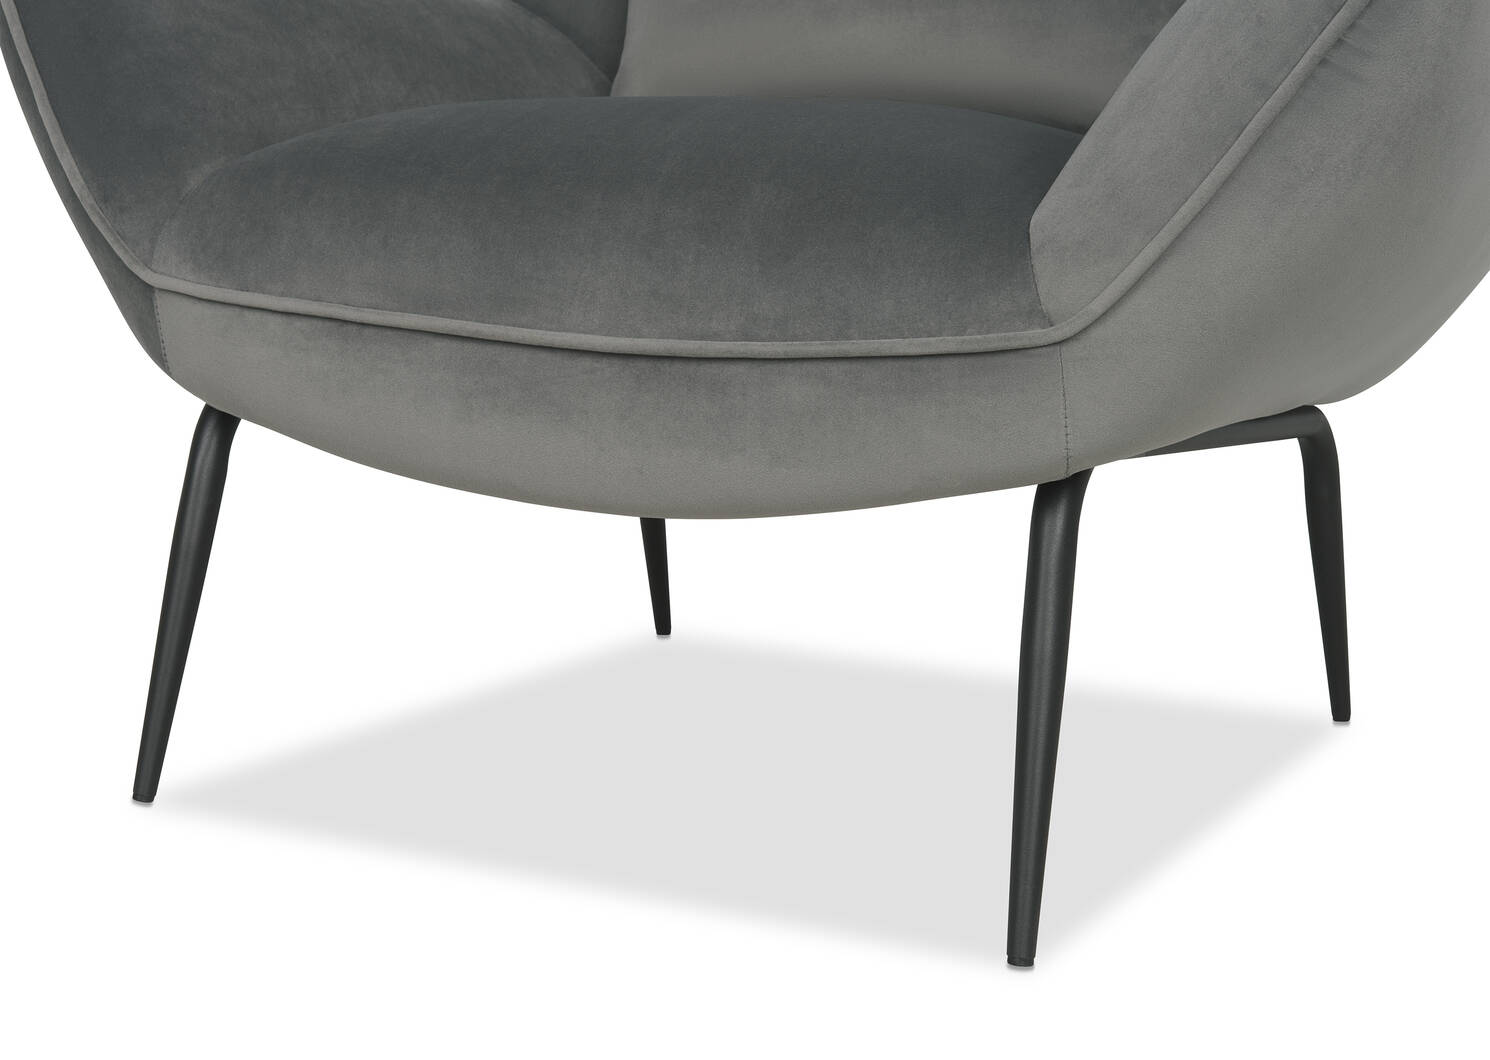 Welsh Armchair -Rale Charcoal